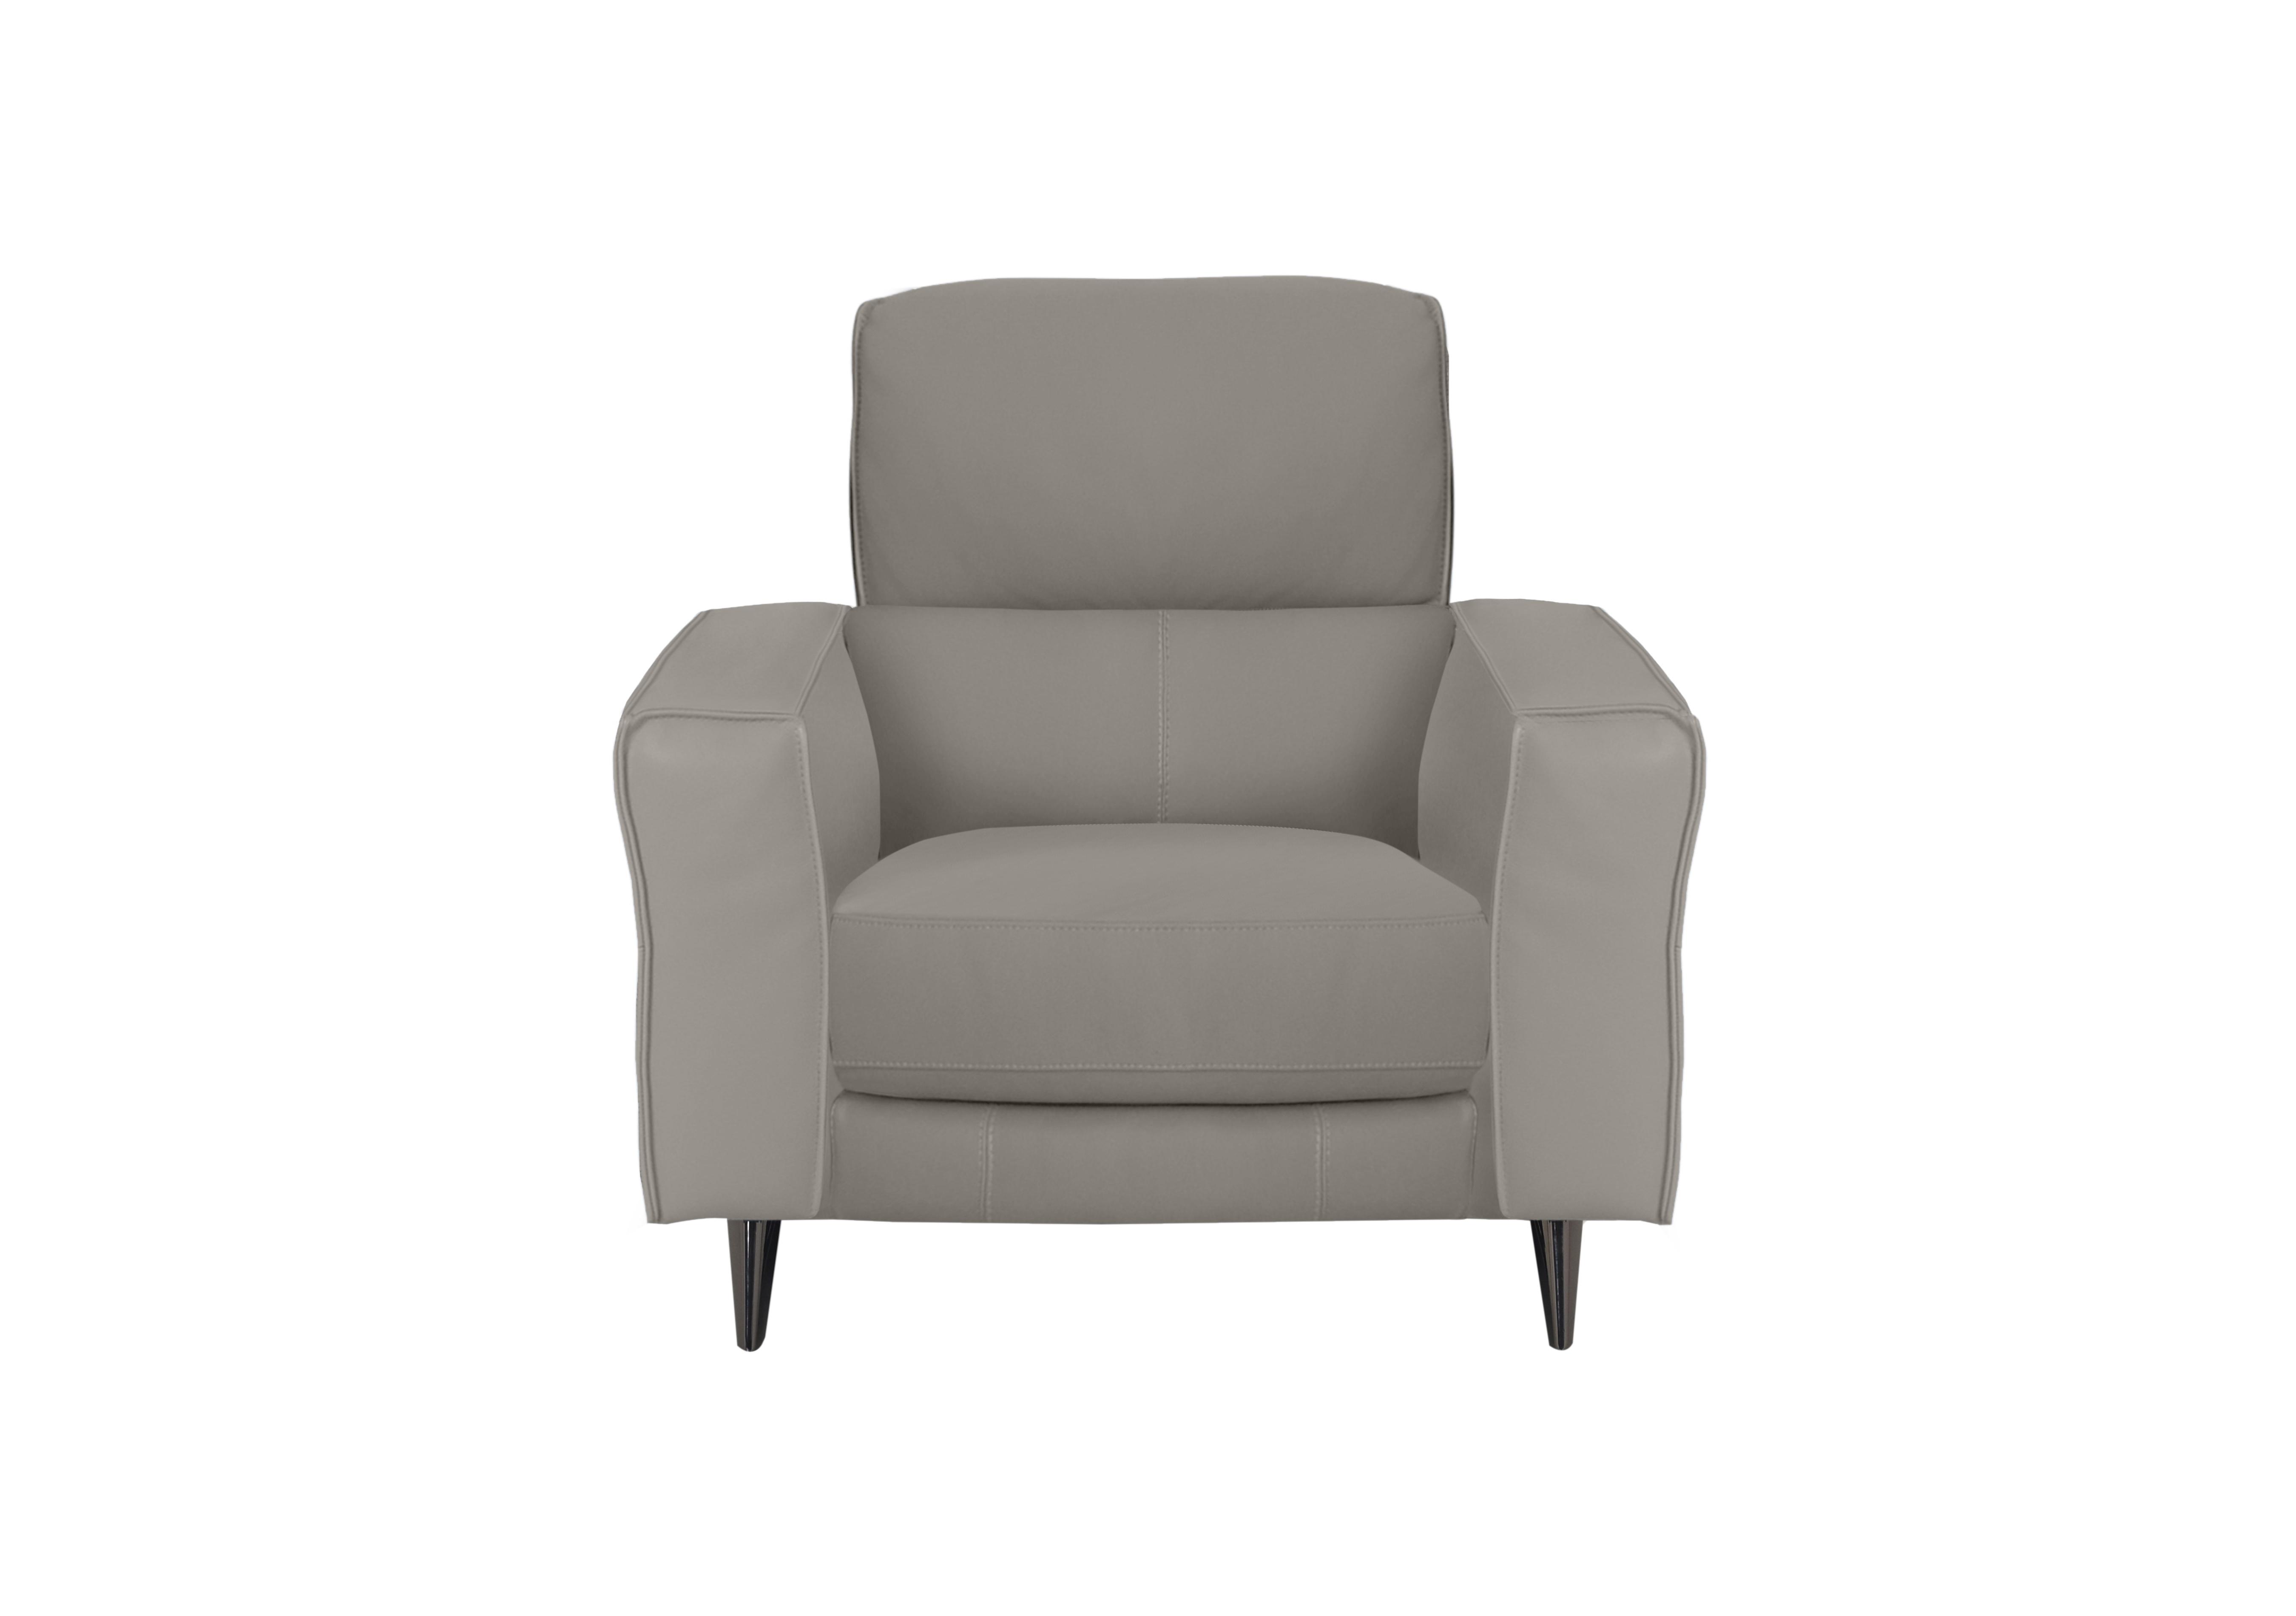 Axel Leather Armchair in Bv-946b Silver Grey on Furniture Village